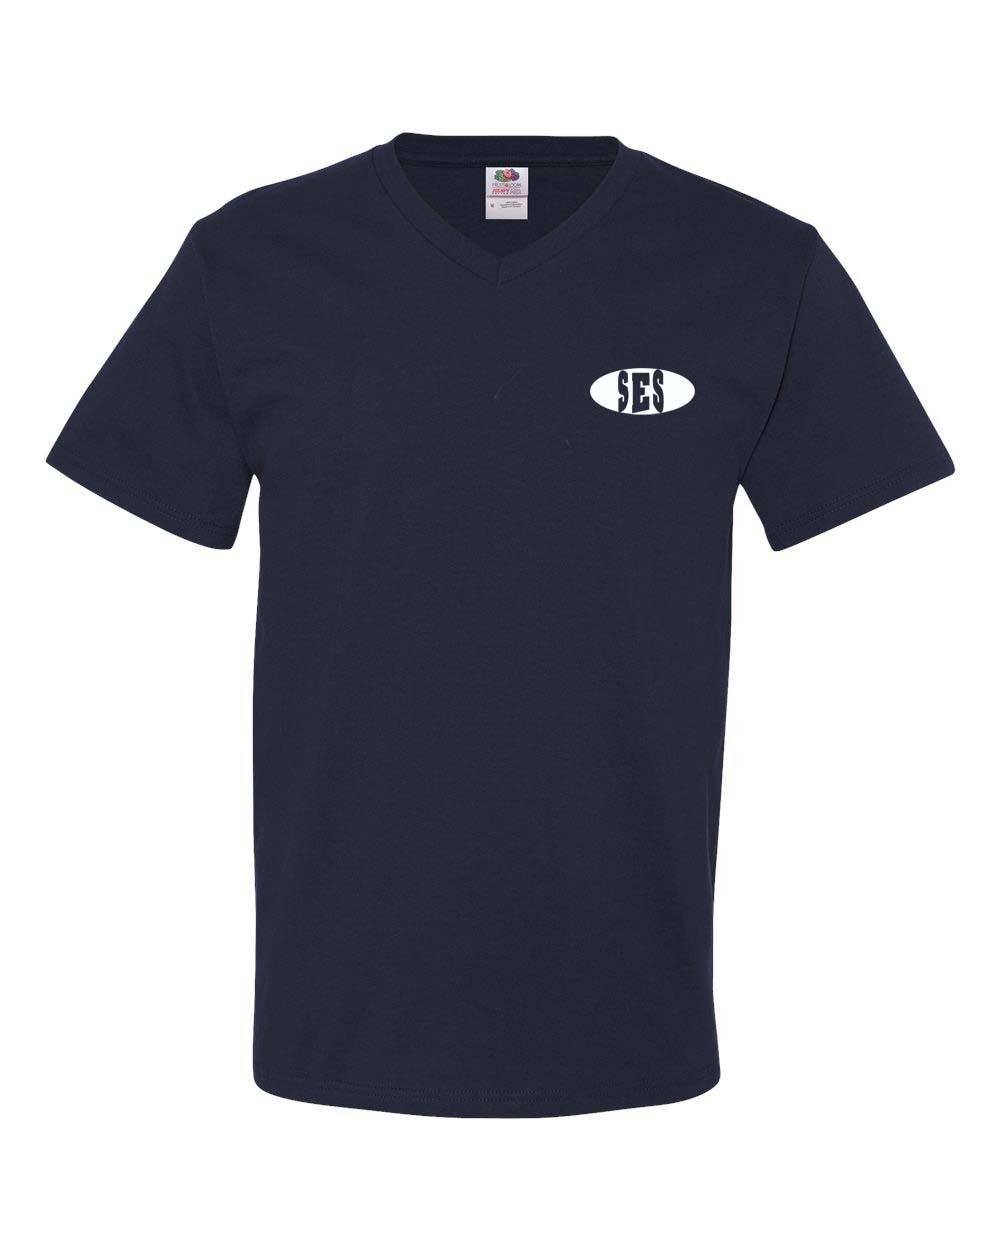 SES Navy Men's Staff V-Neck T-shirt w/ Logo - Please Allow 2-3 Weeks for Delivery